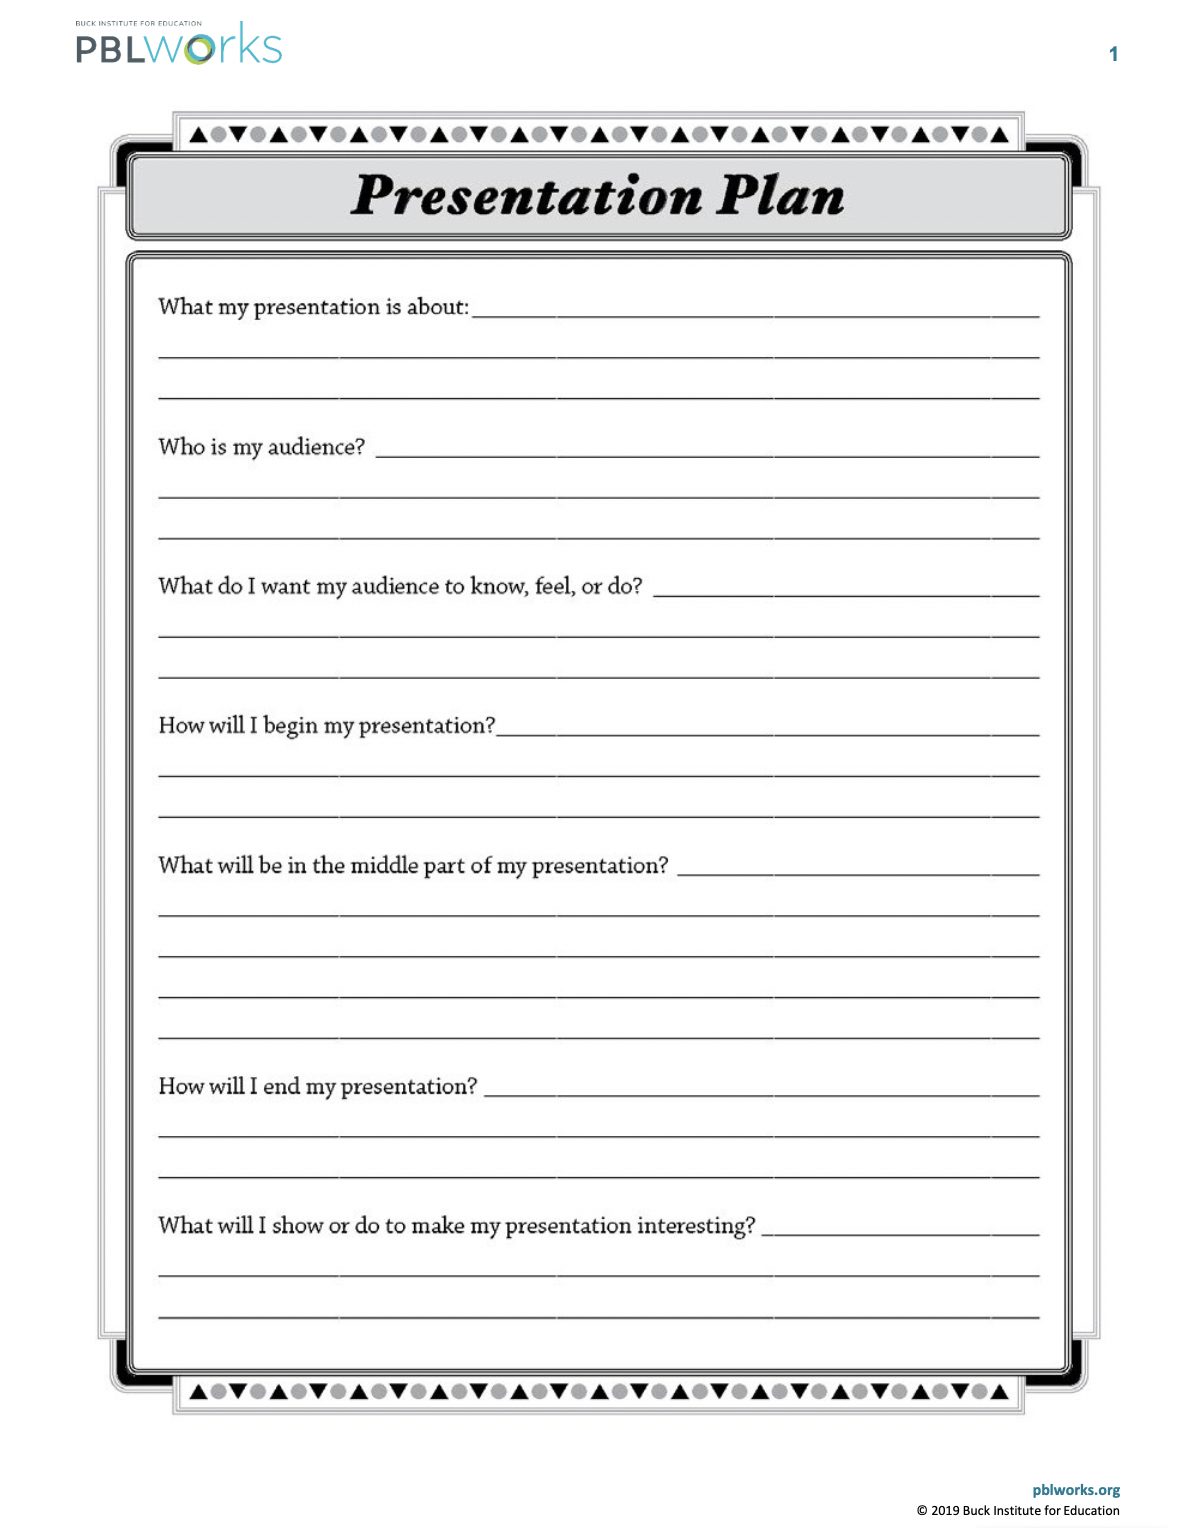 plan for the presentation